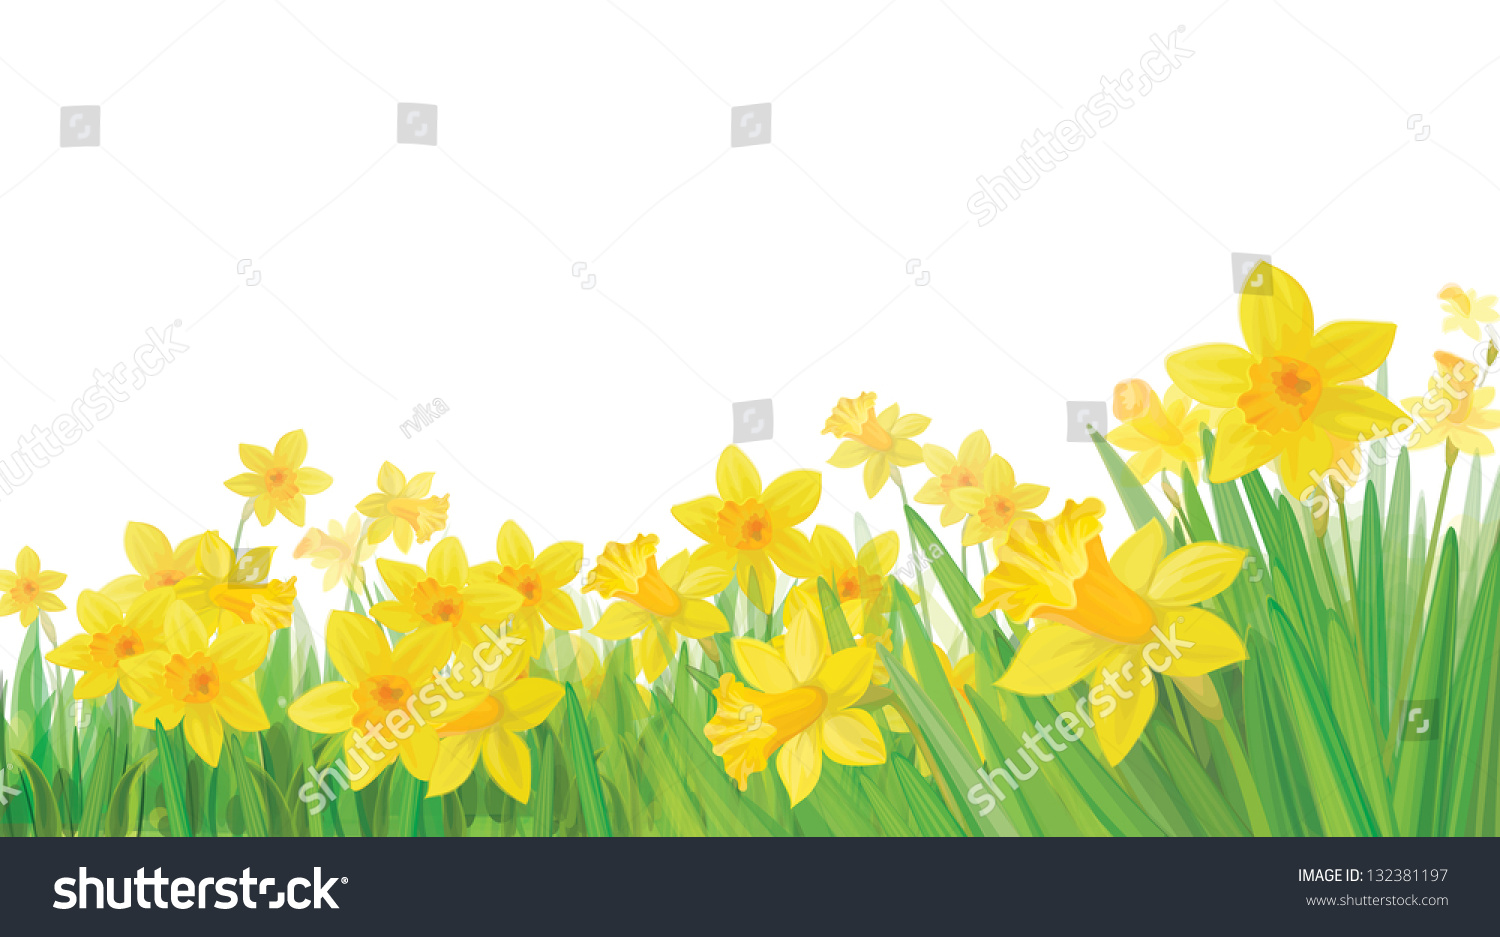 SVG of Vector of daffodil flowers isolated. svg